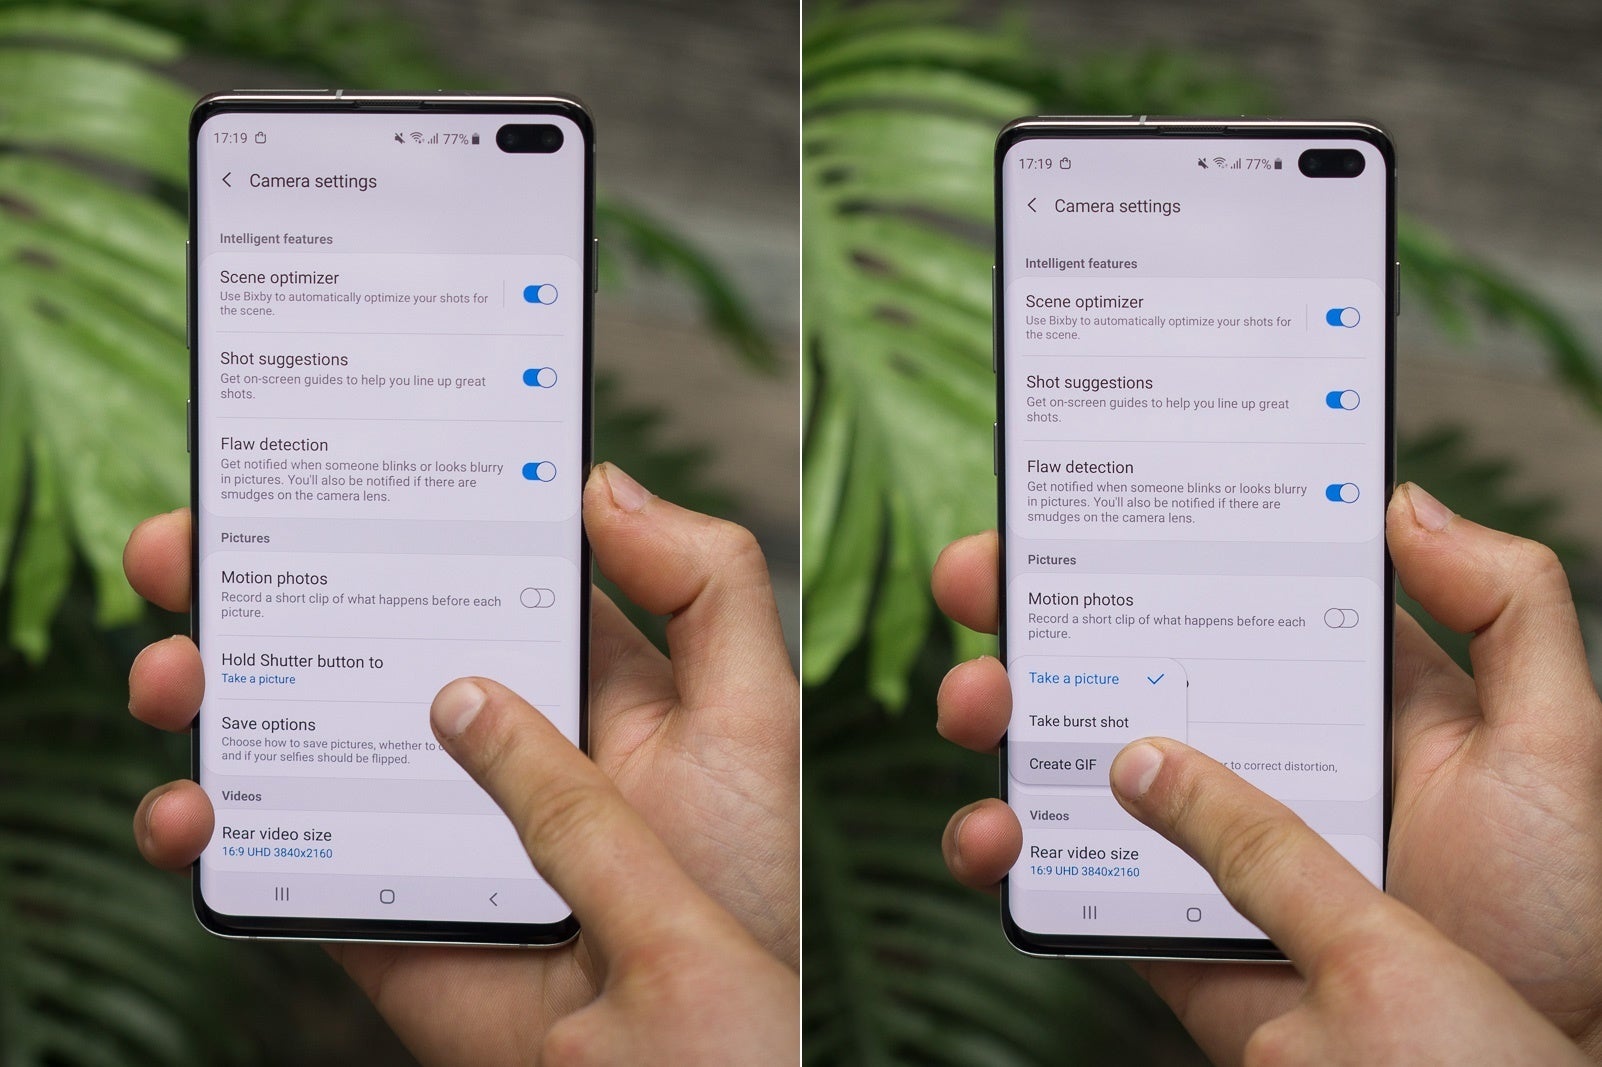 How to make a GIF on Samsung's Galaxy S10, S10 Plus or S10e without downloading any apps